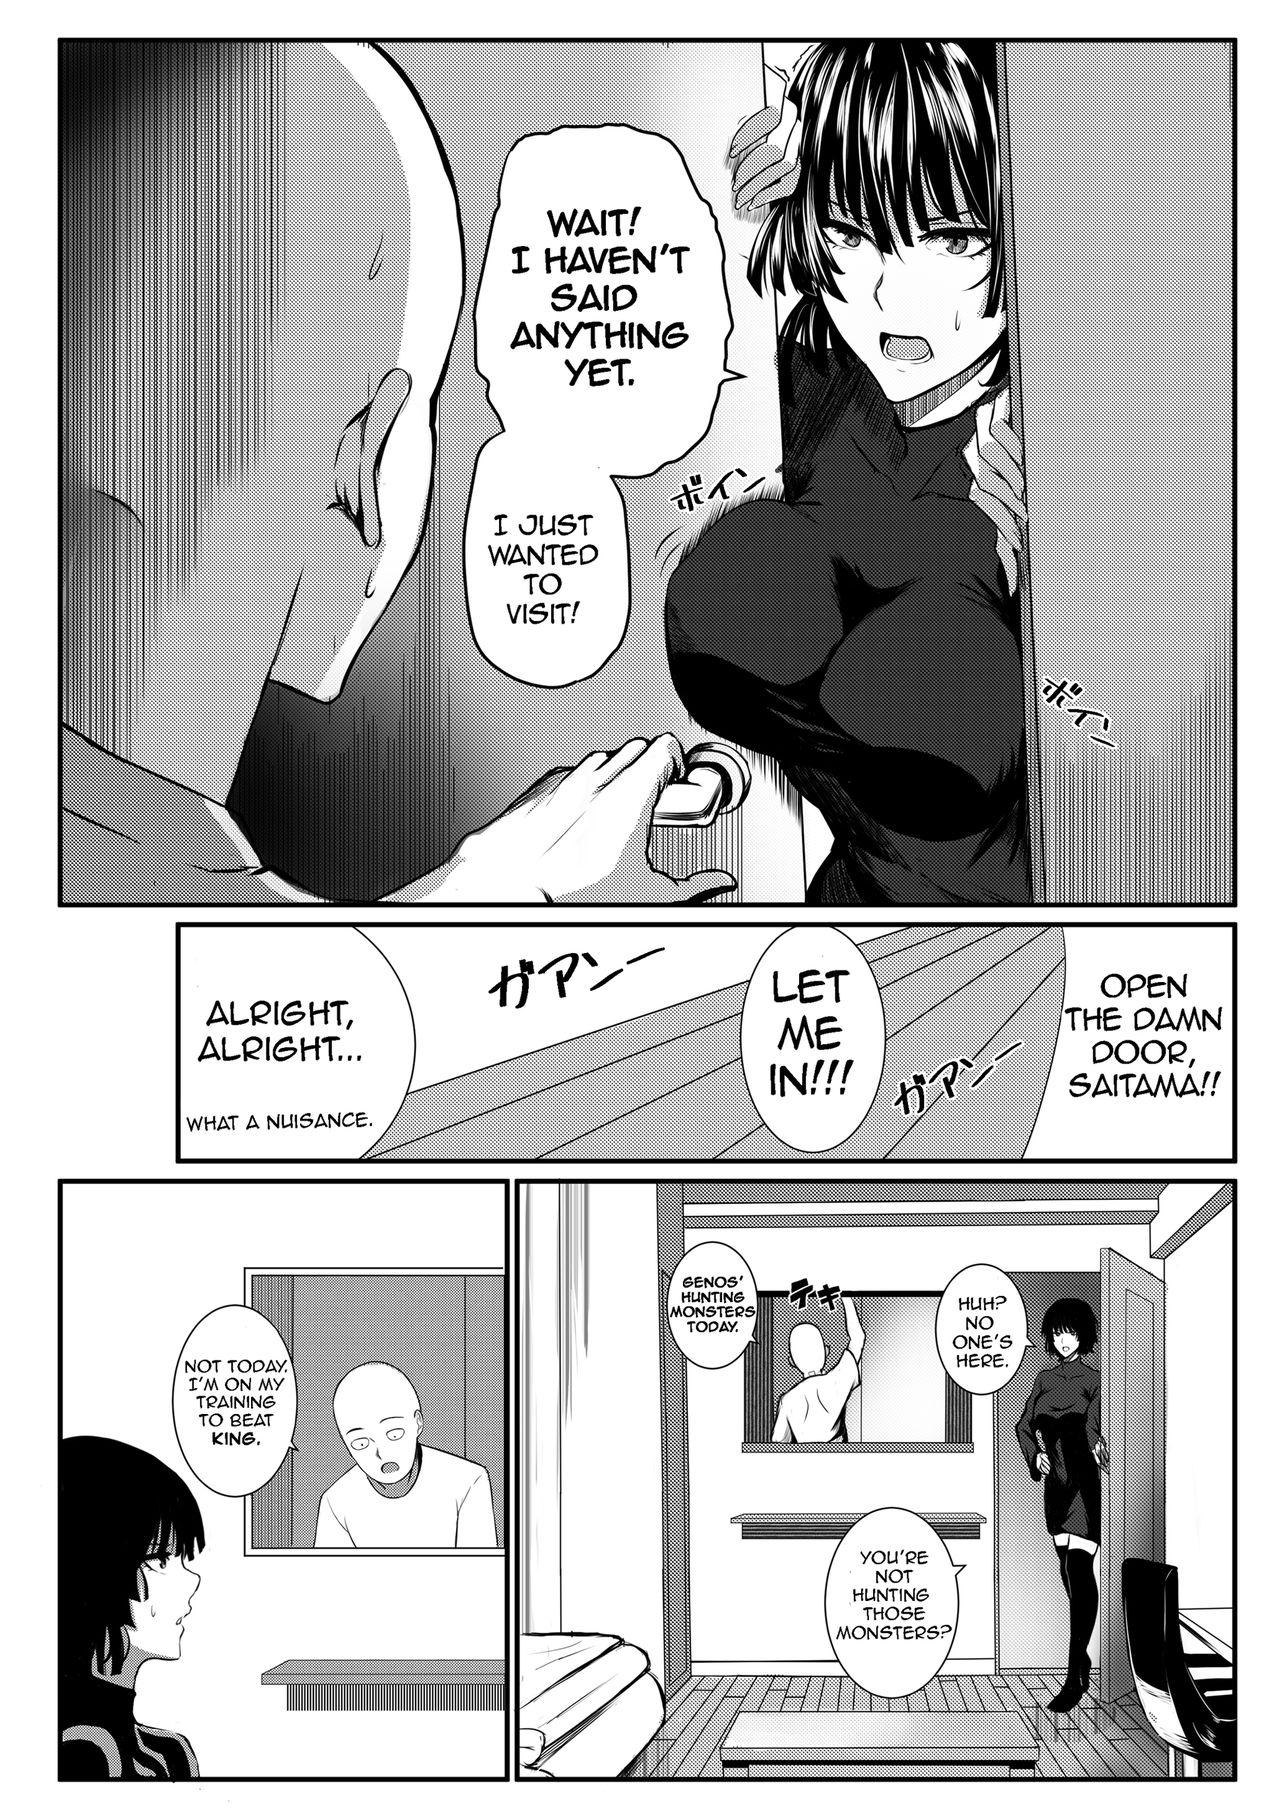 Sensual ONE THRUST-MAN - One punch man Blowjob Porn - Page 4